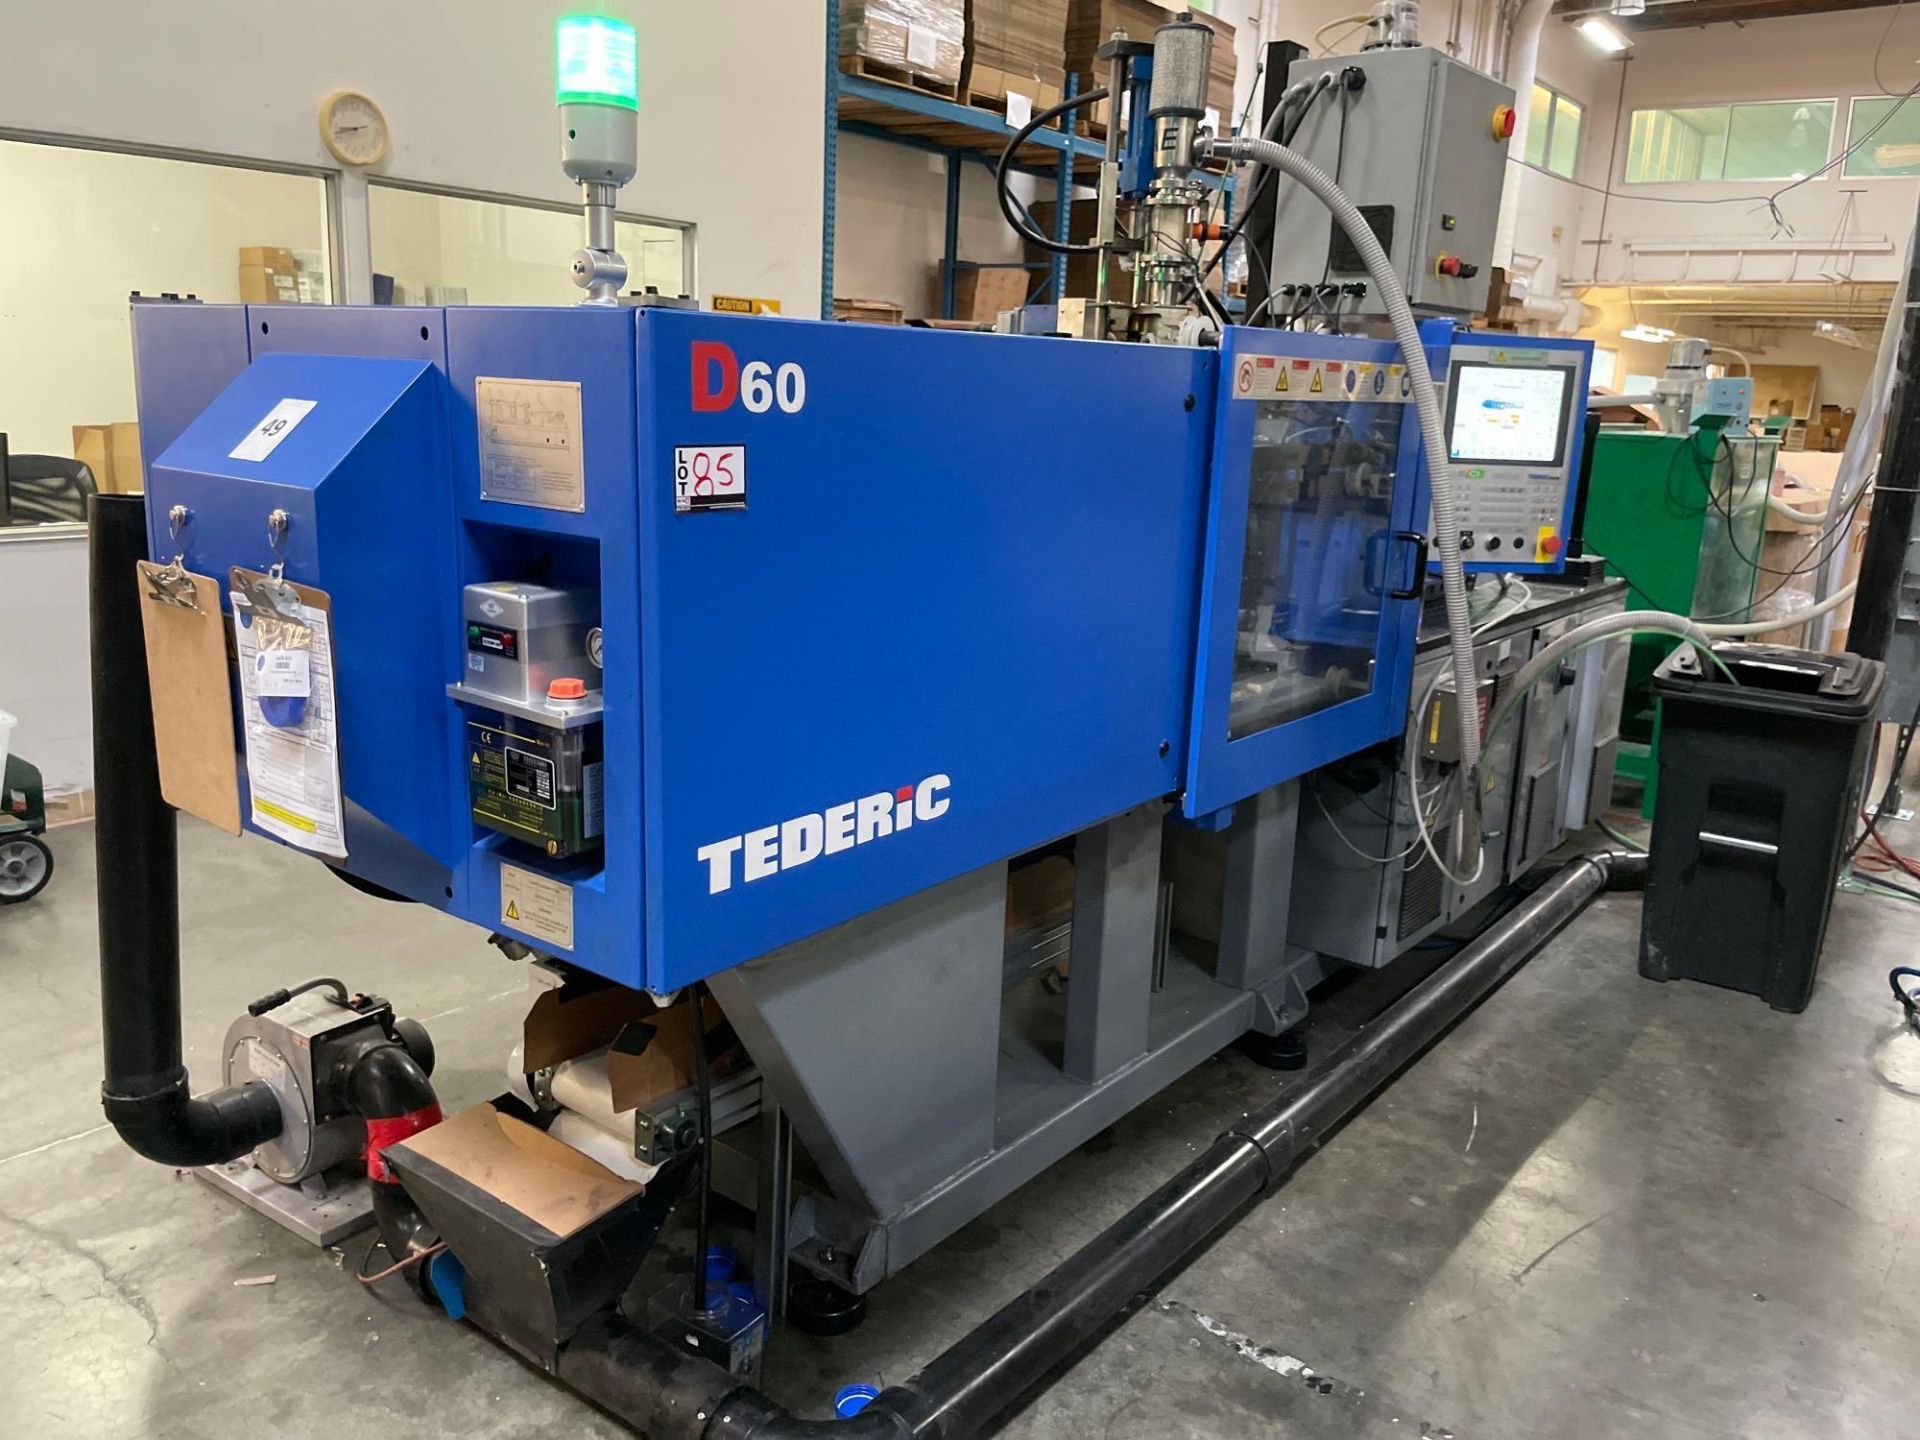 66 Ton Tederic D60 Plastic Injection Molder, Keba 12000 Control, s/n T00800275, New 2020 - Image 7 of 15